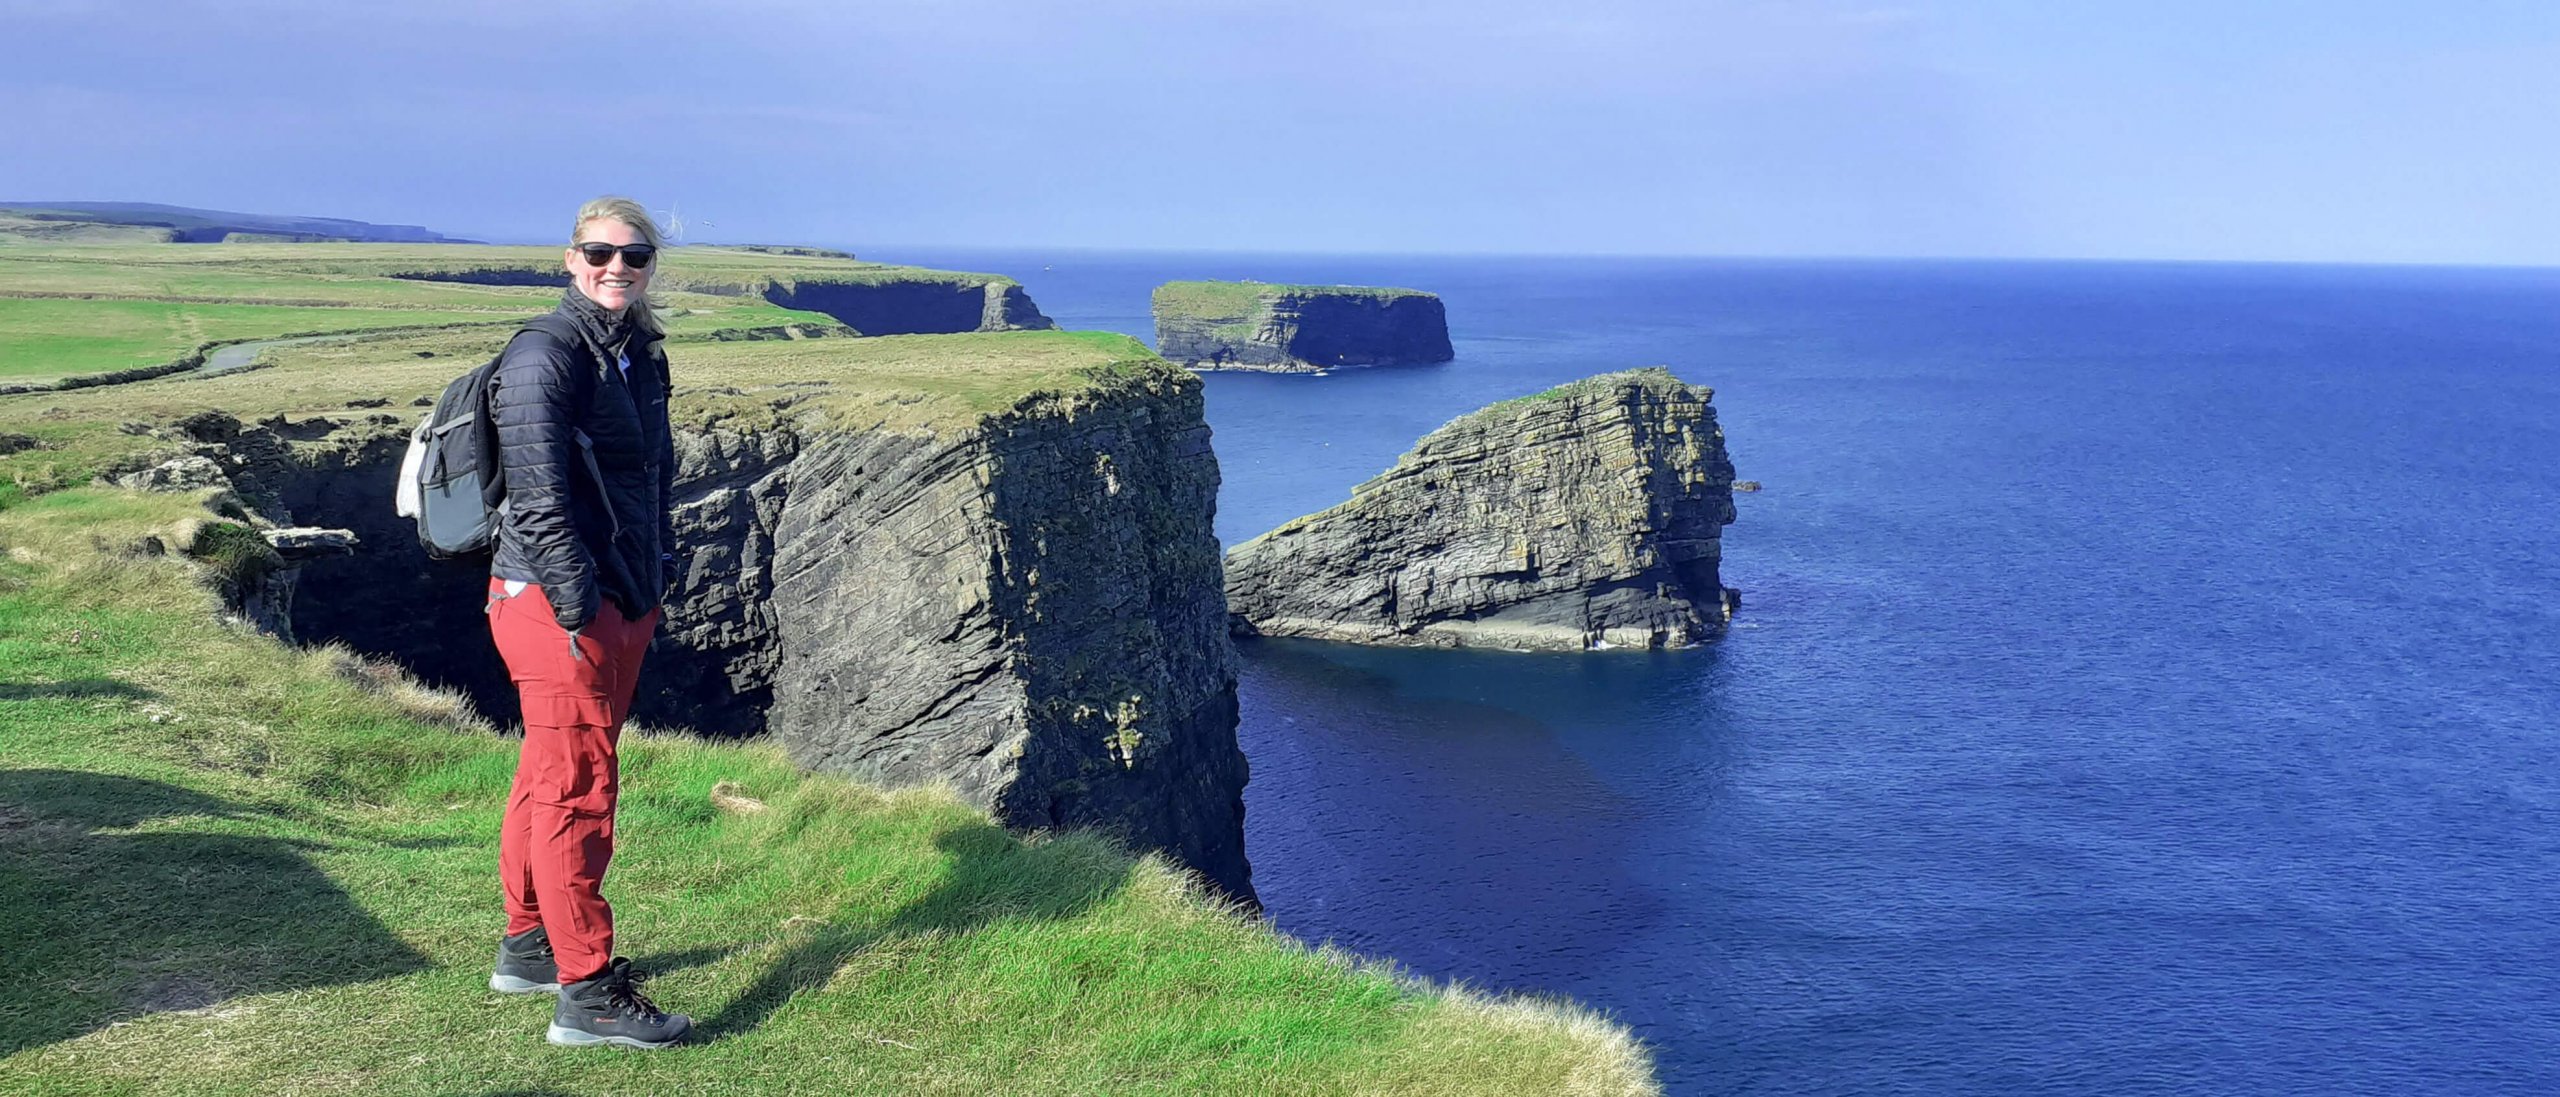 Tour guest at Kilkee cliffs on a active vacation in Ireland